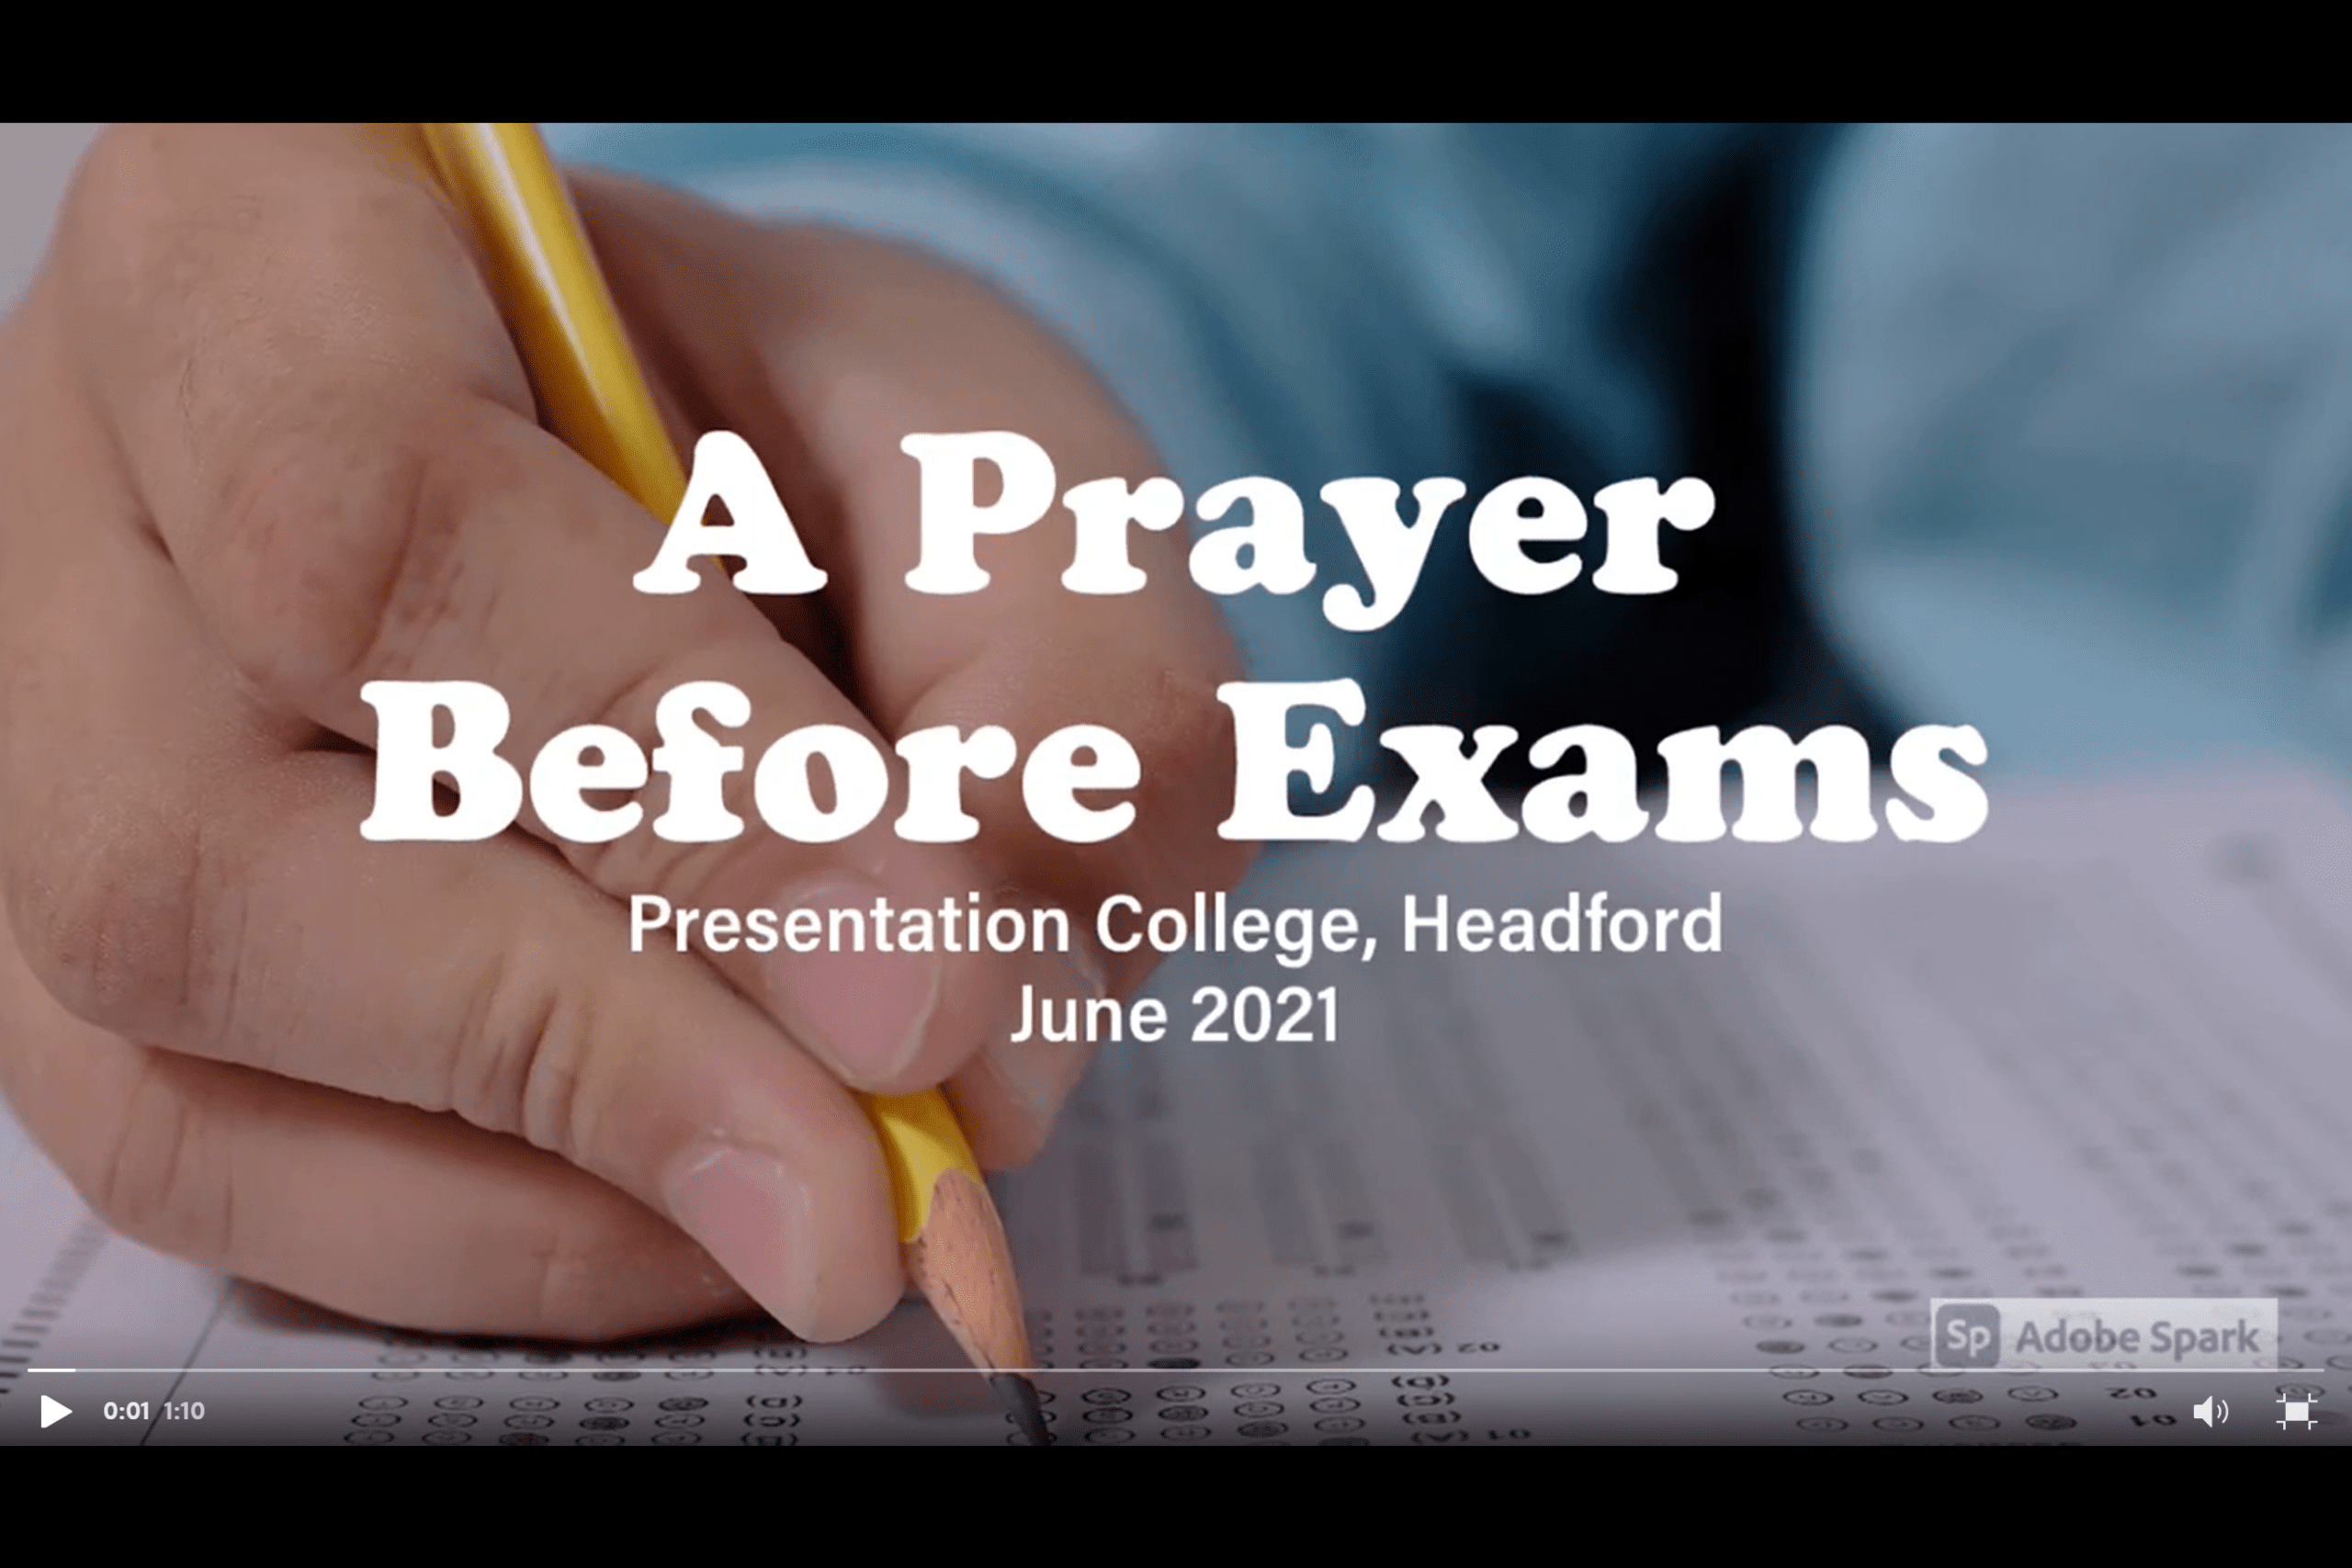 exam prayers for students